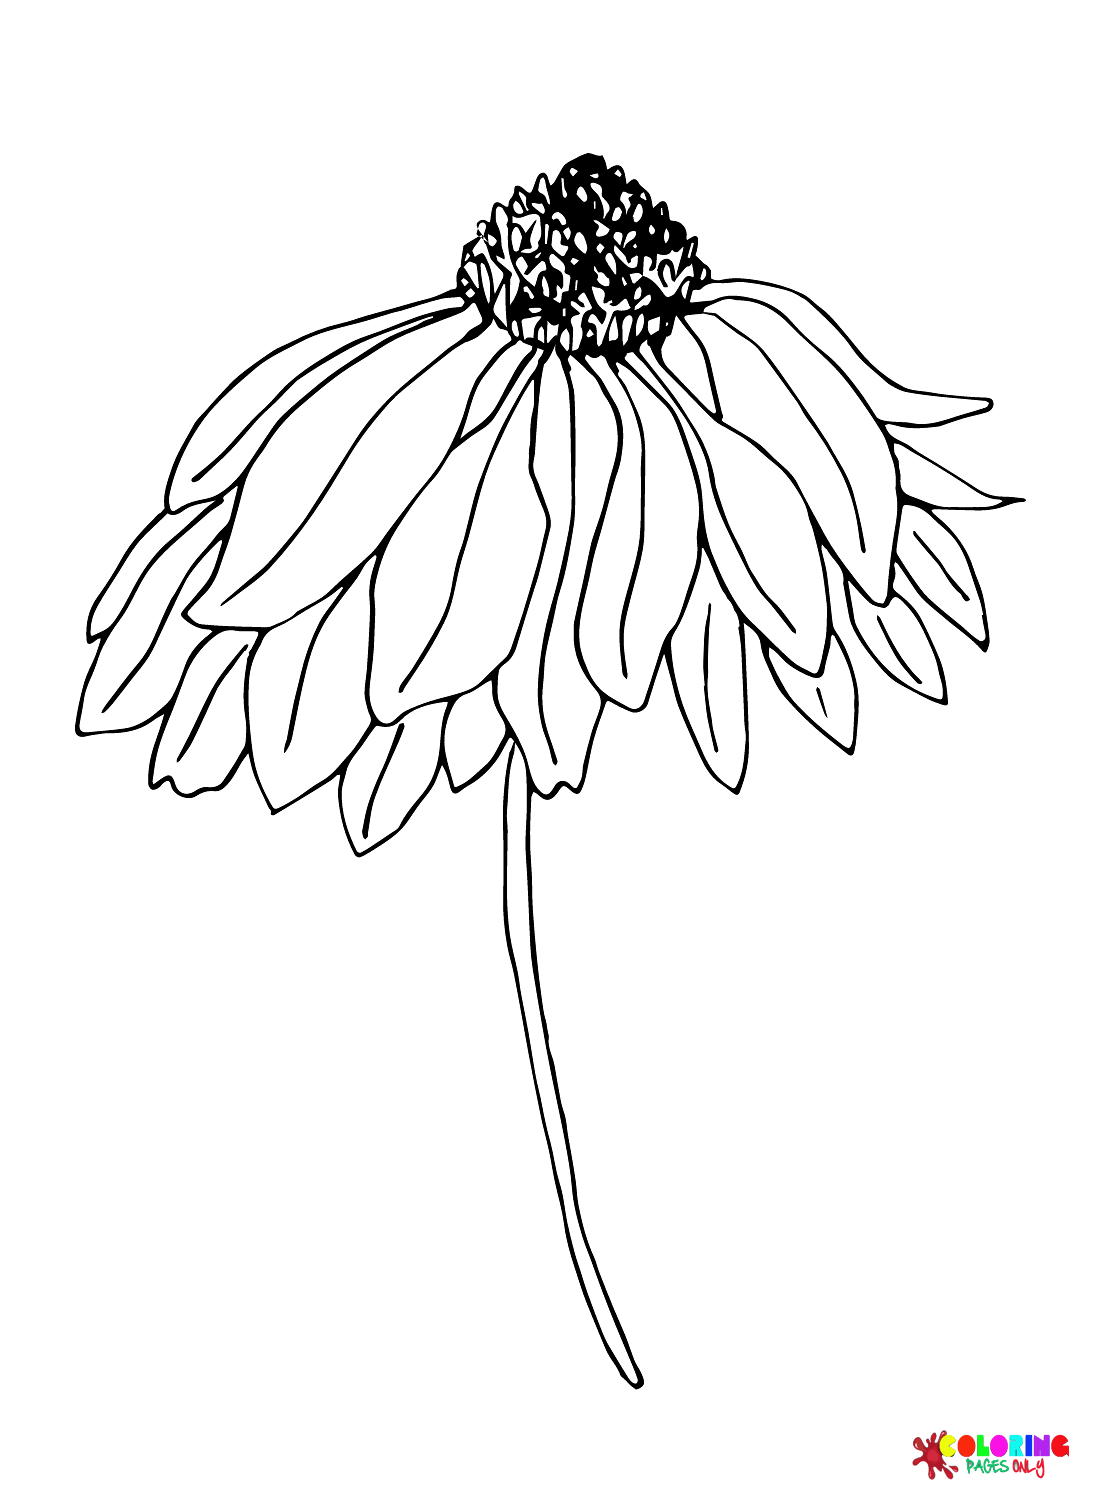 Daisy Flower Free Coloring Page